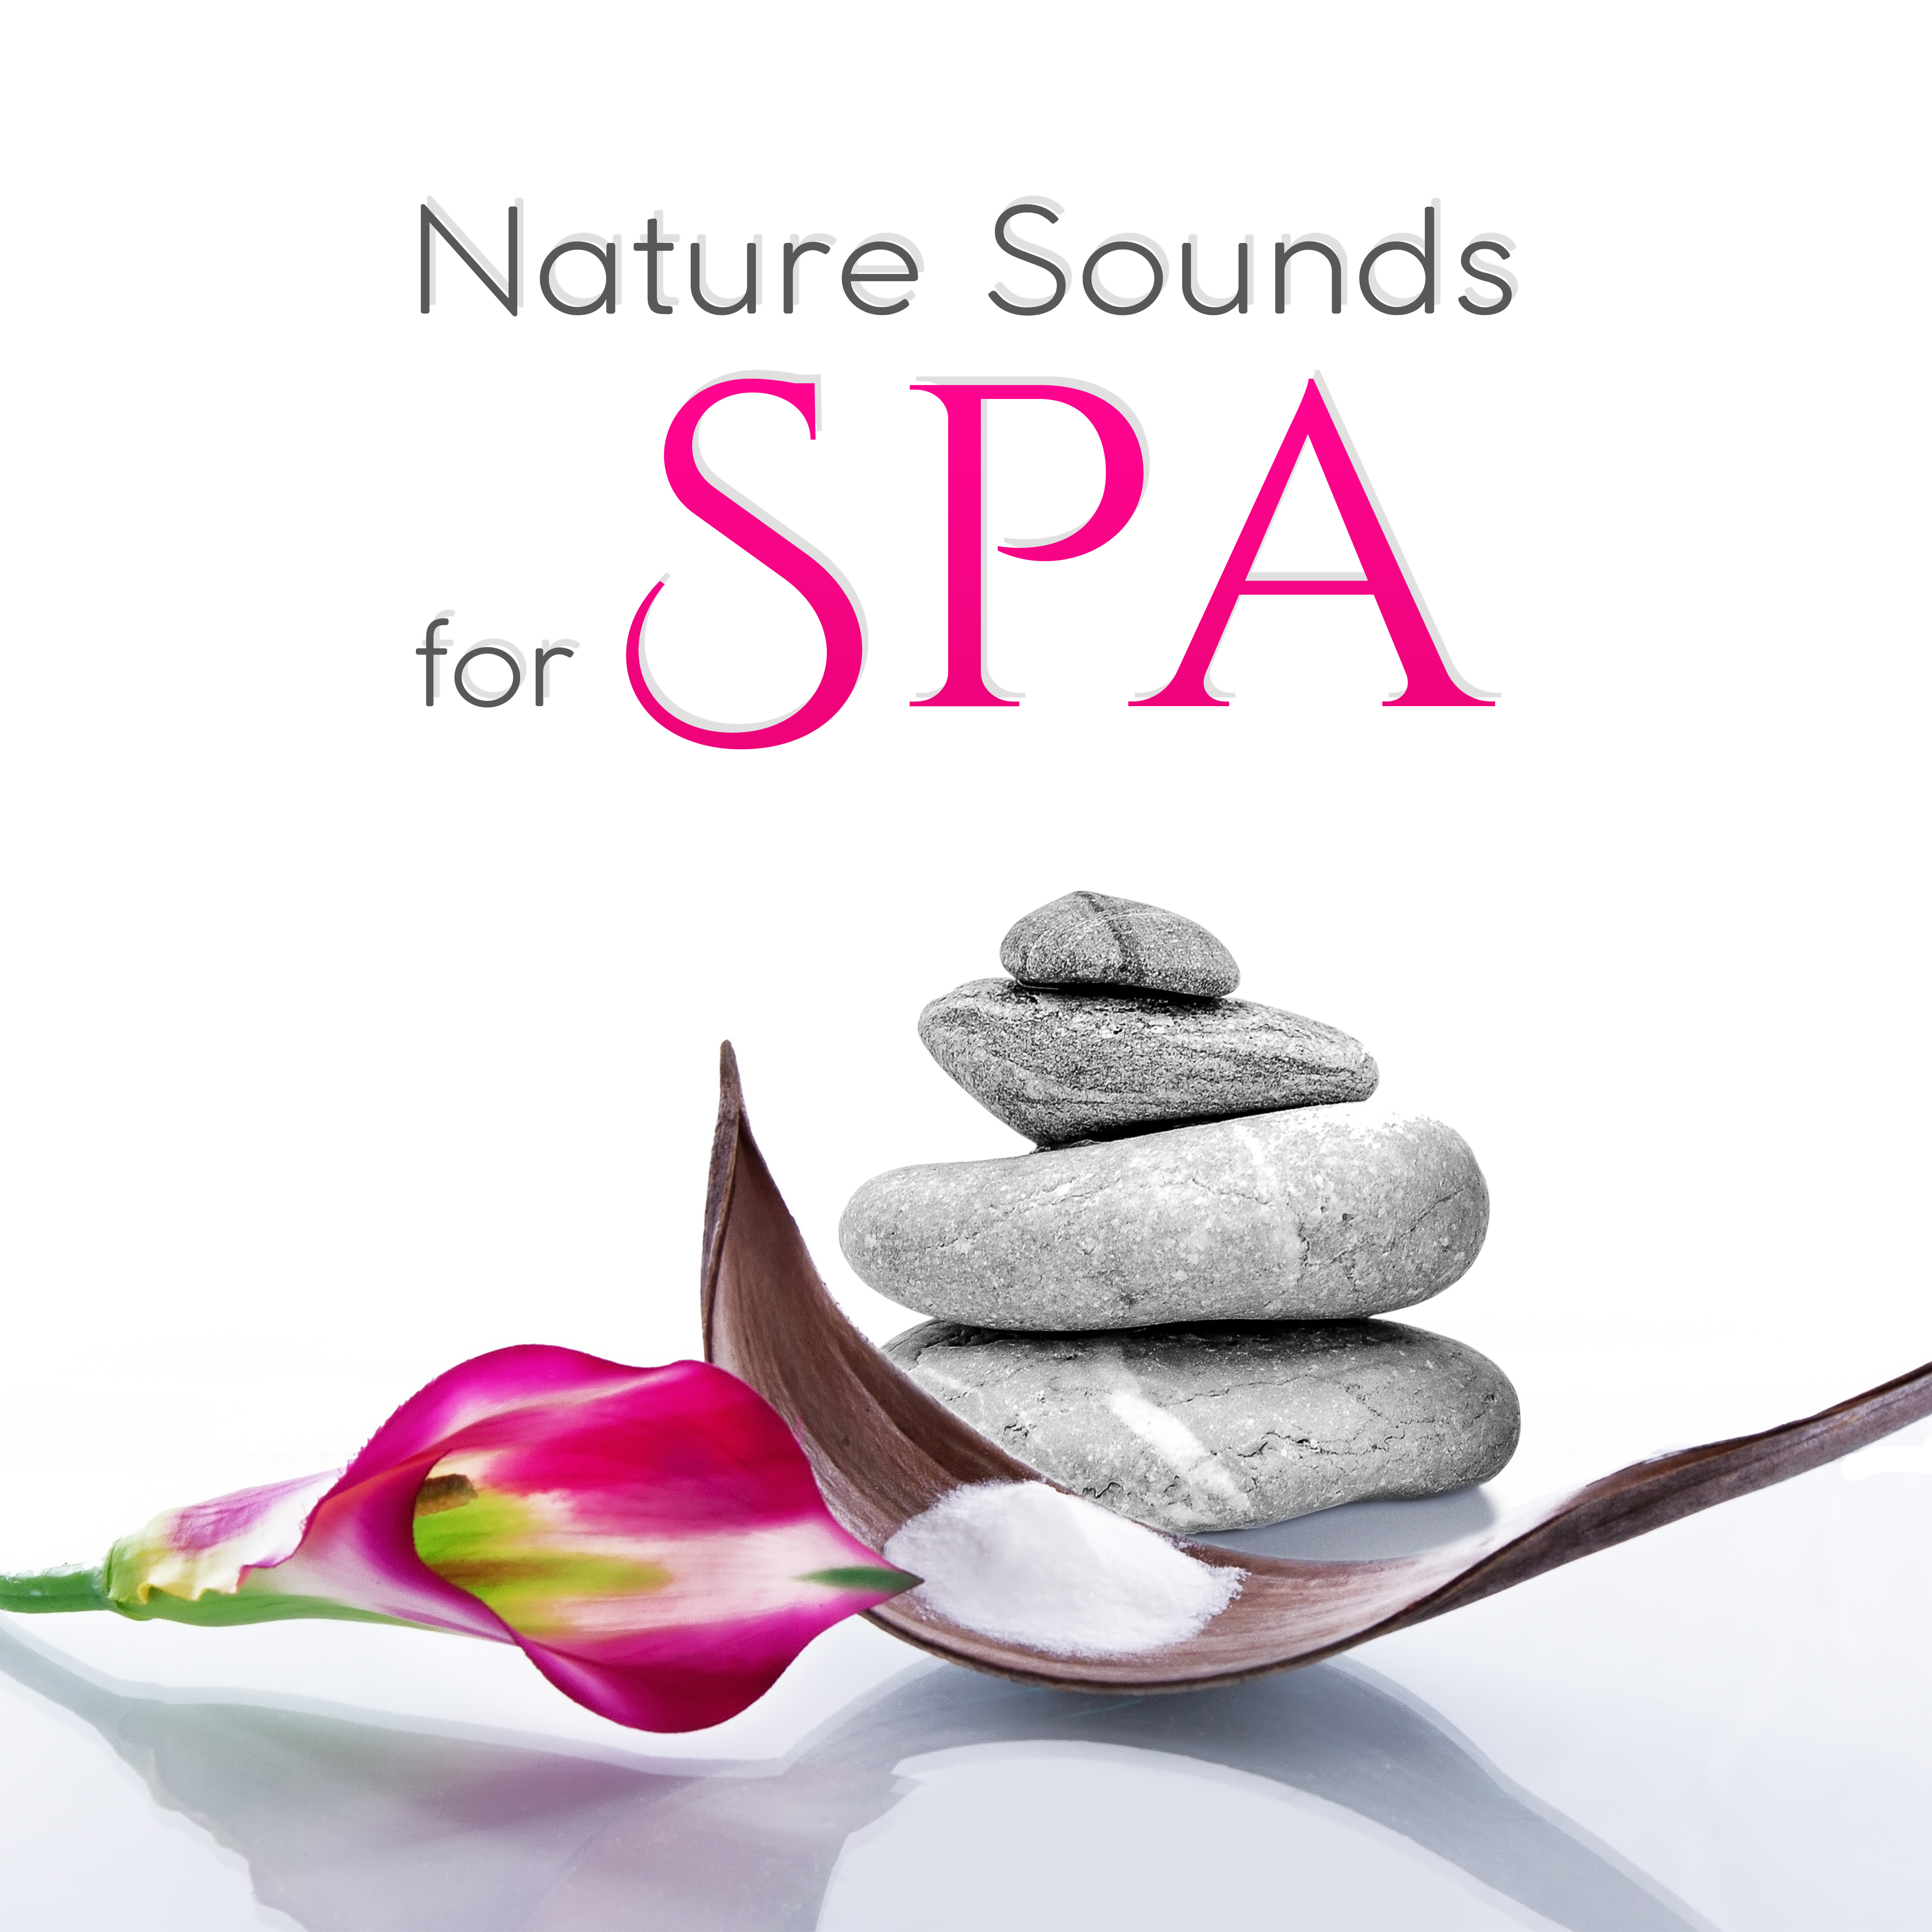 Nature Sounds for Spa – Pure Relaxation, Soothing Music for Wellness, Massage, Spa Dreams Music, Relaxing New Age, Piano